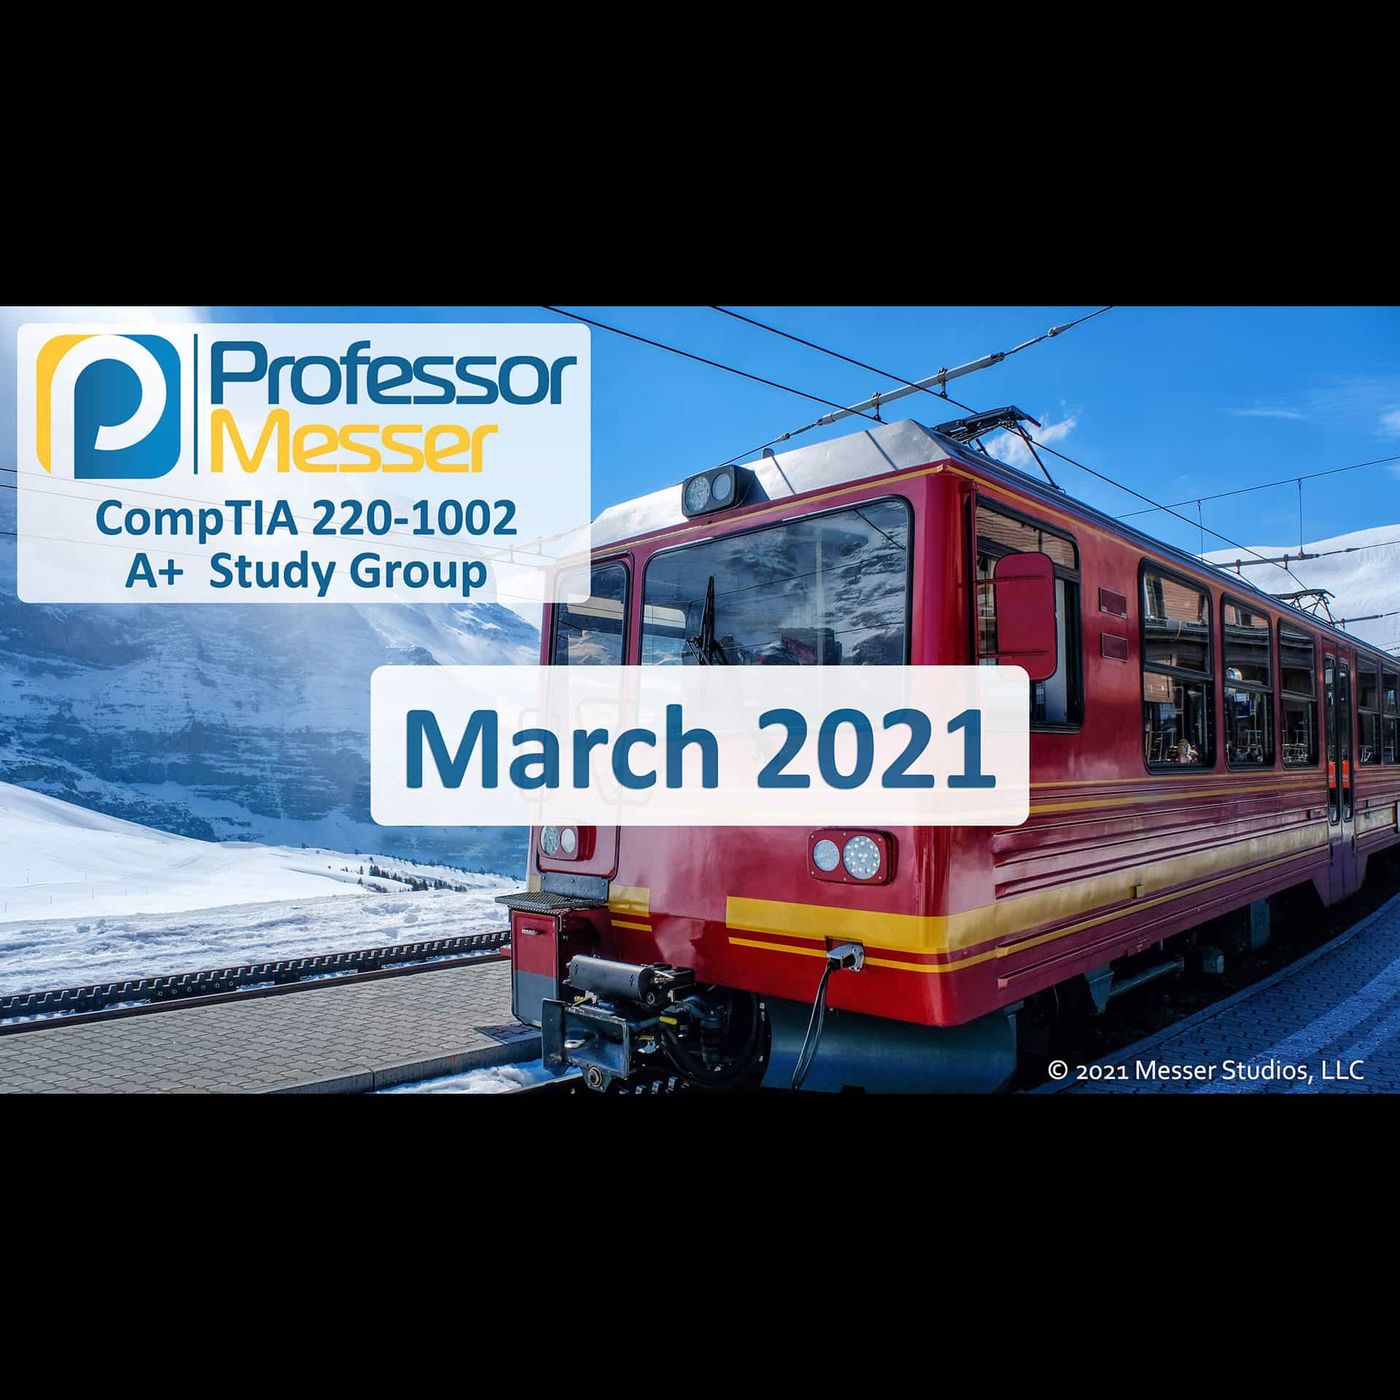 Professor Messer's CompTIA 220-1002 A+ Study Group - March 2021